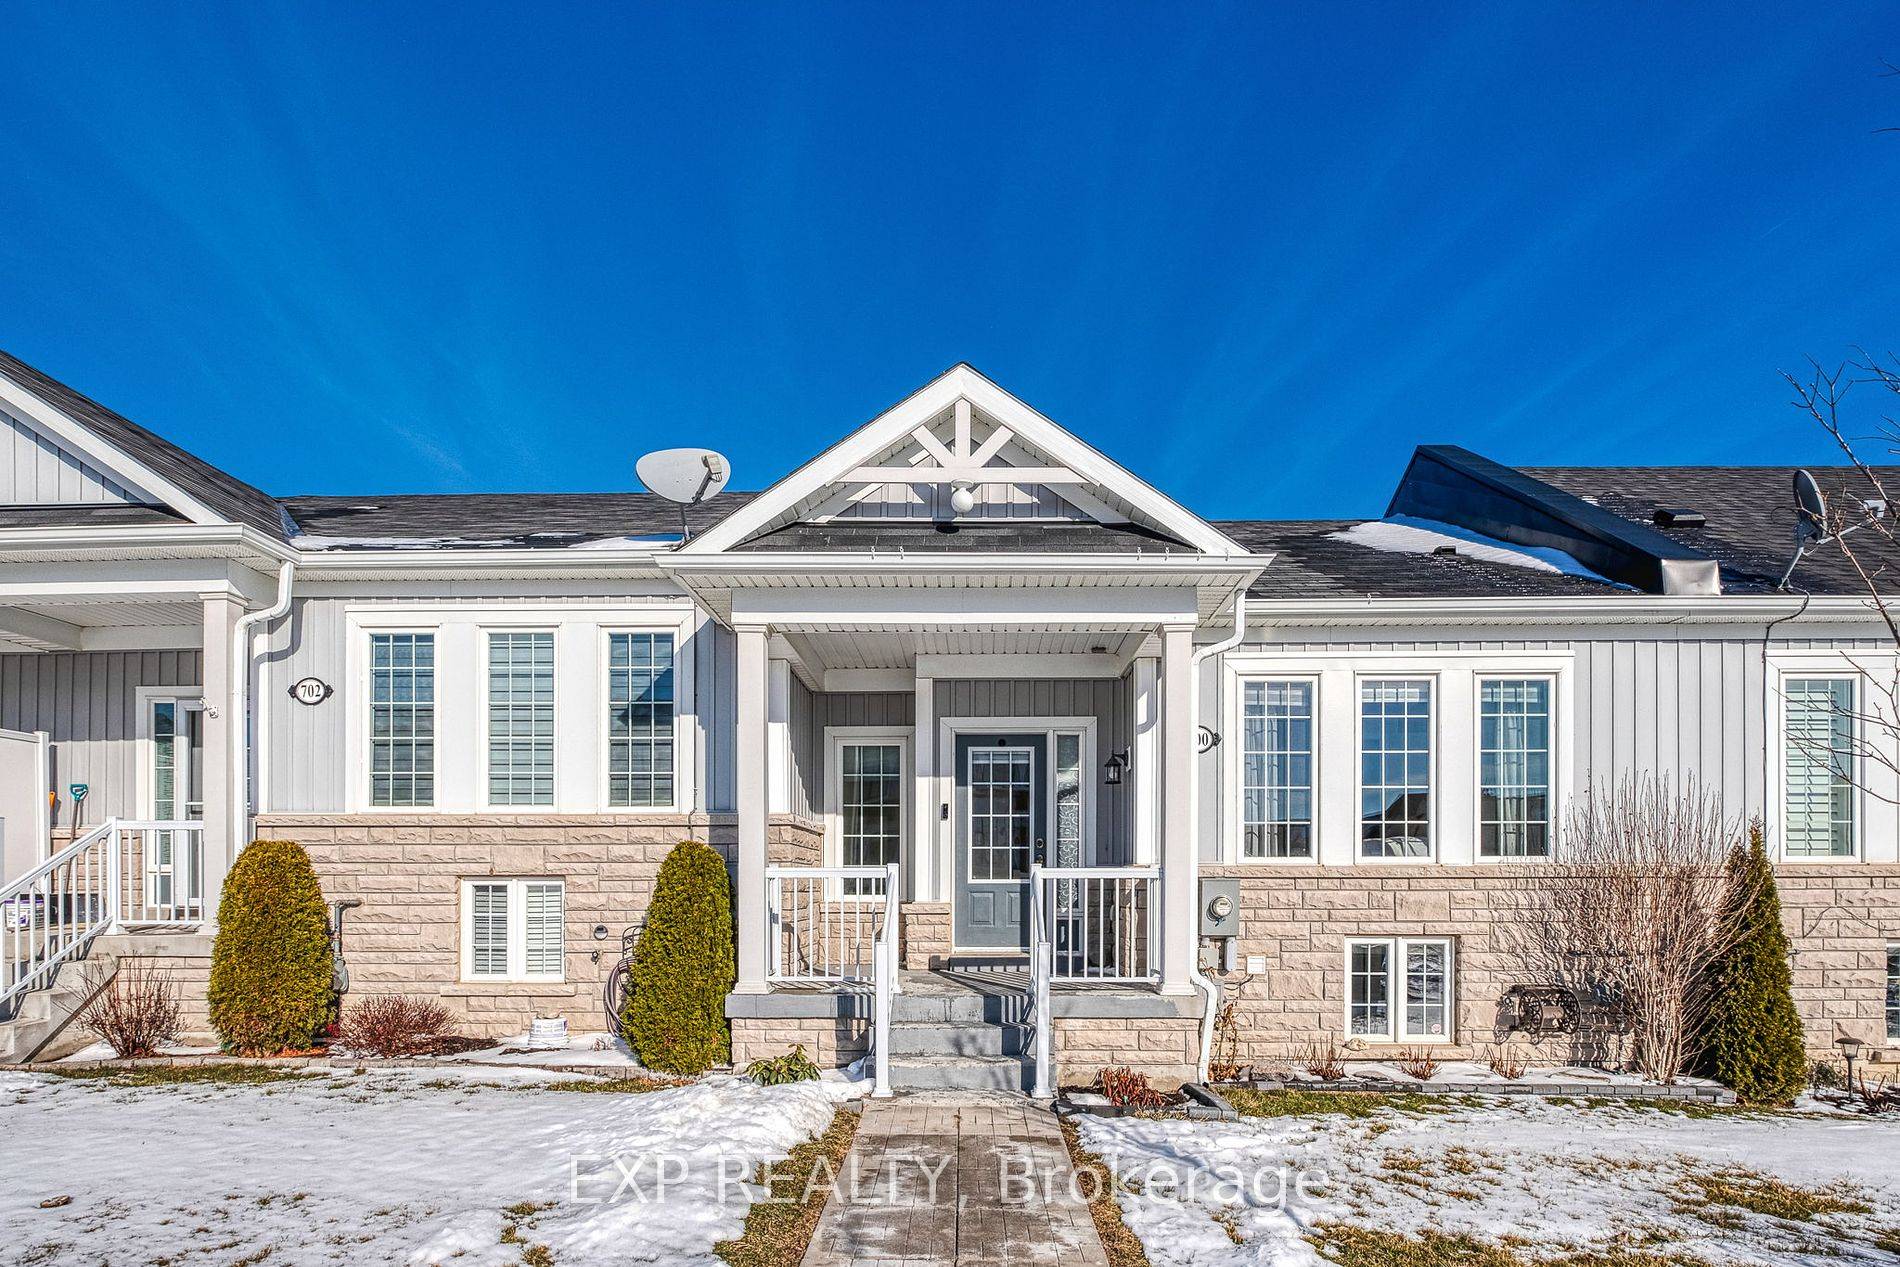 Stunning Garden Town Bungalow located in the very exclusive West Park Village of Ontario's Feel Good Town with parks, trails and phenomenal lifestyle community waiting.